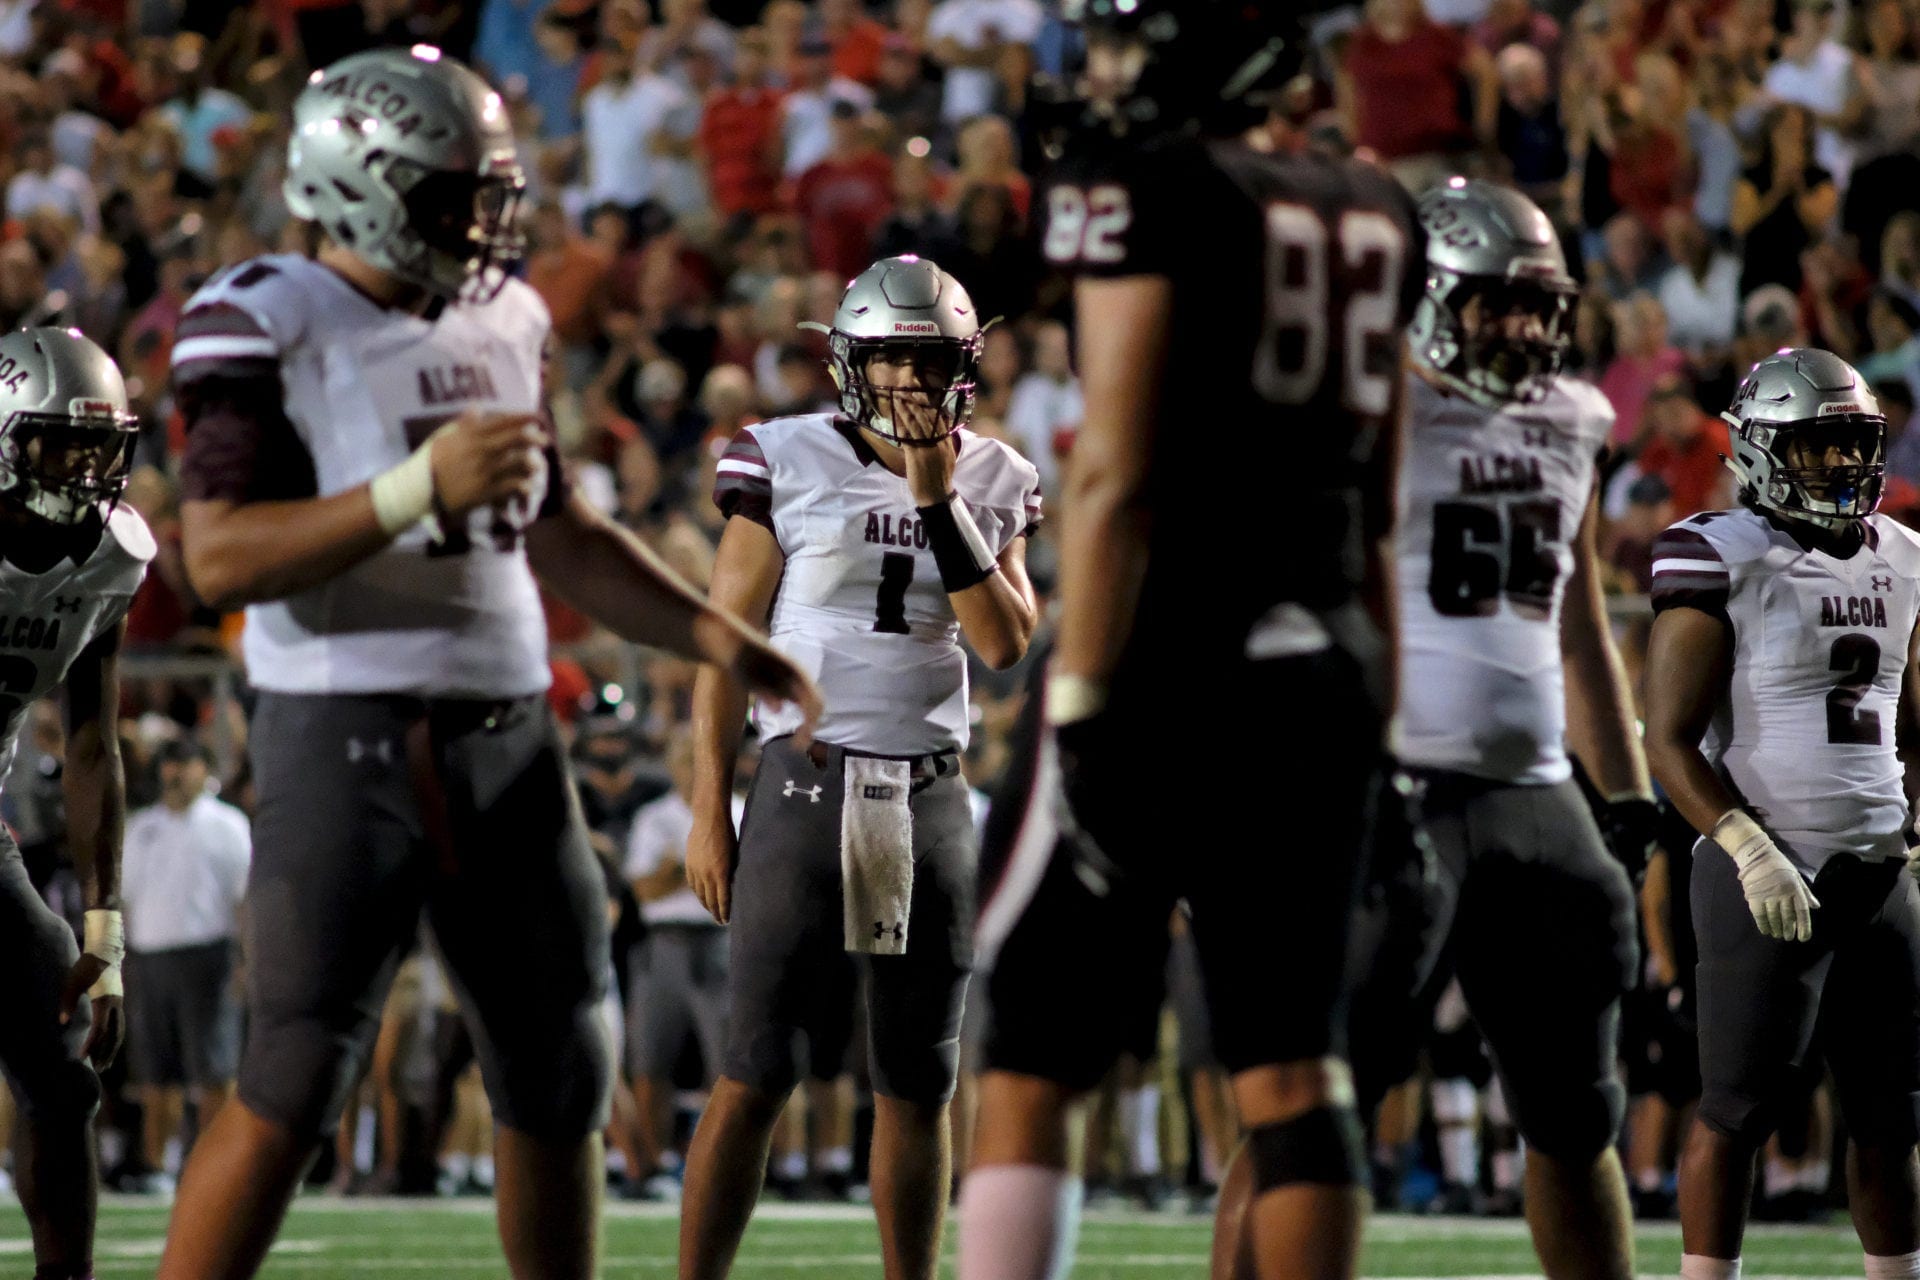 REHASHED Alcoa vs. Maryville The Rivalry, Moments and Heroes since